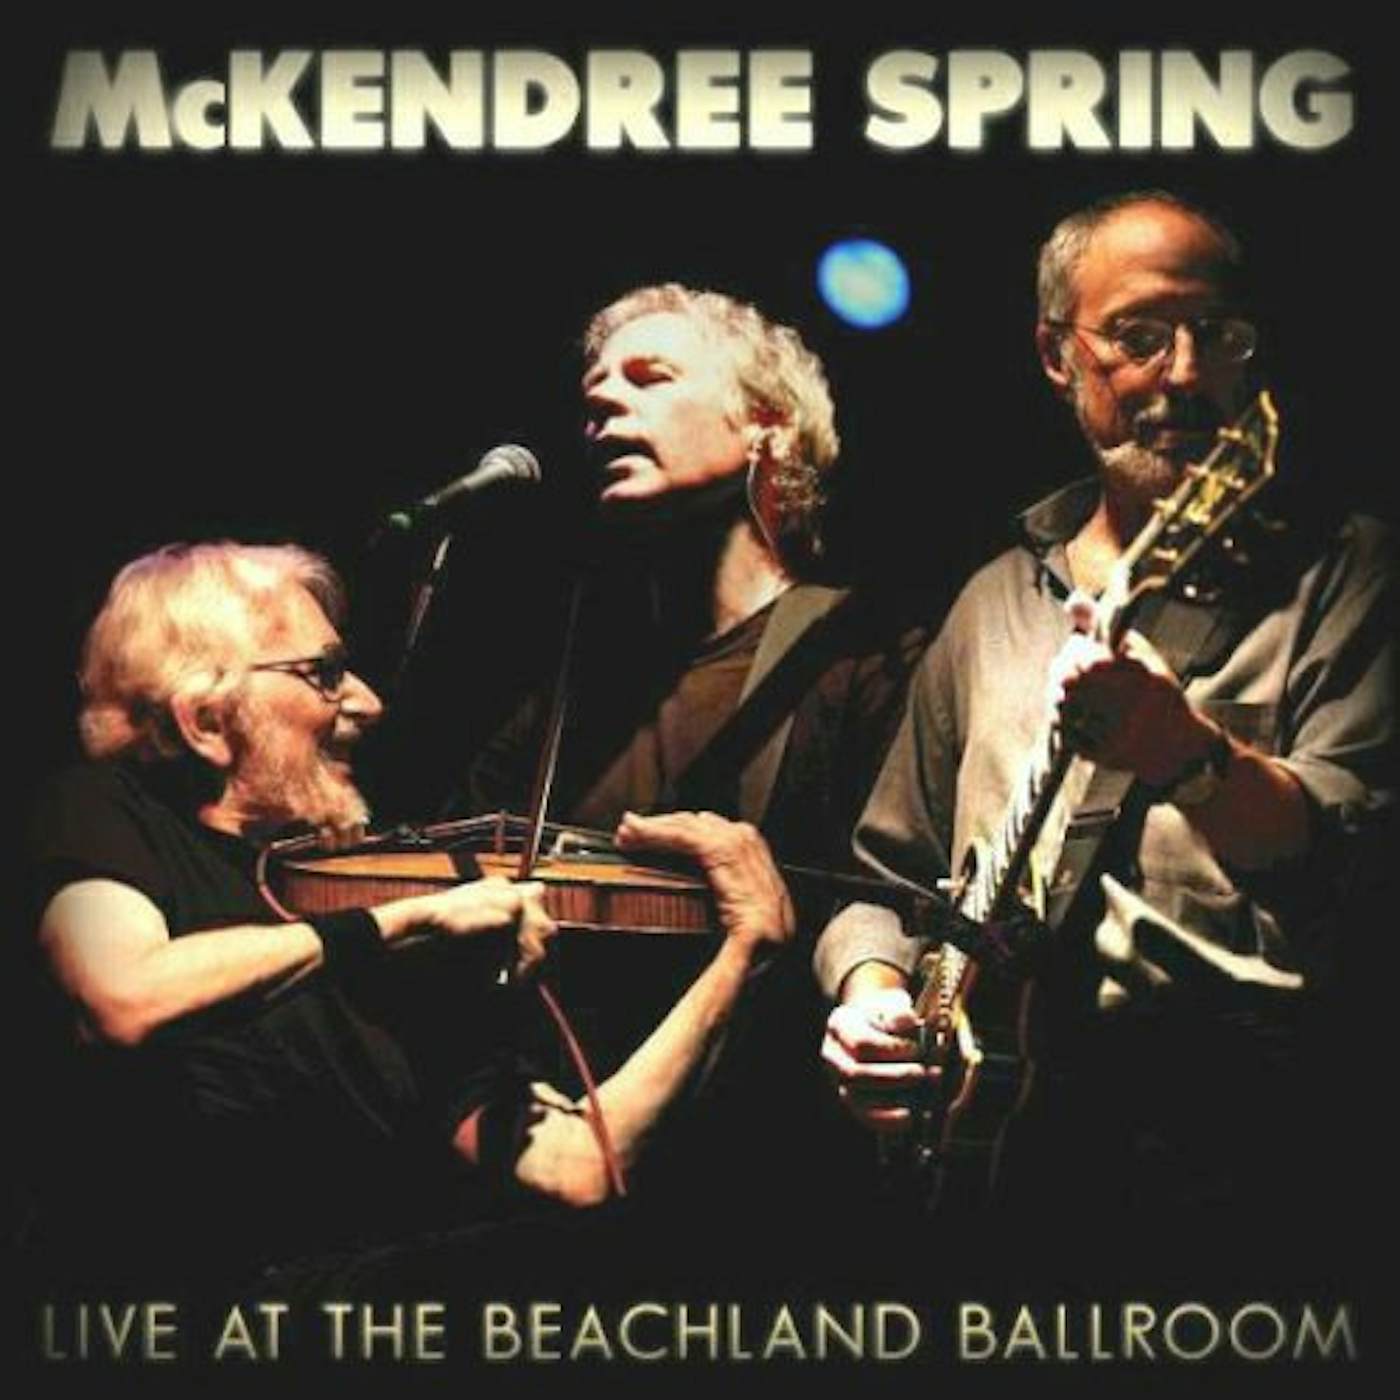 McKendree Spring LIVE AT THE BEACHLAND BALLROOM CD